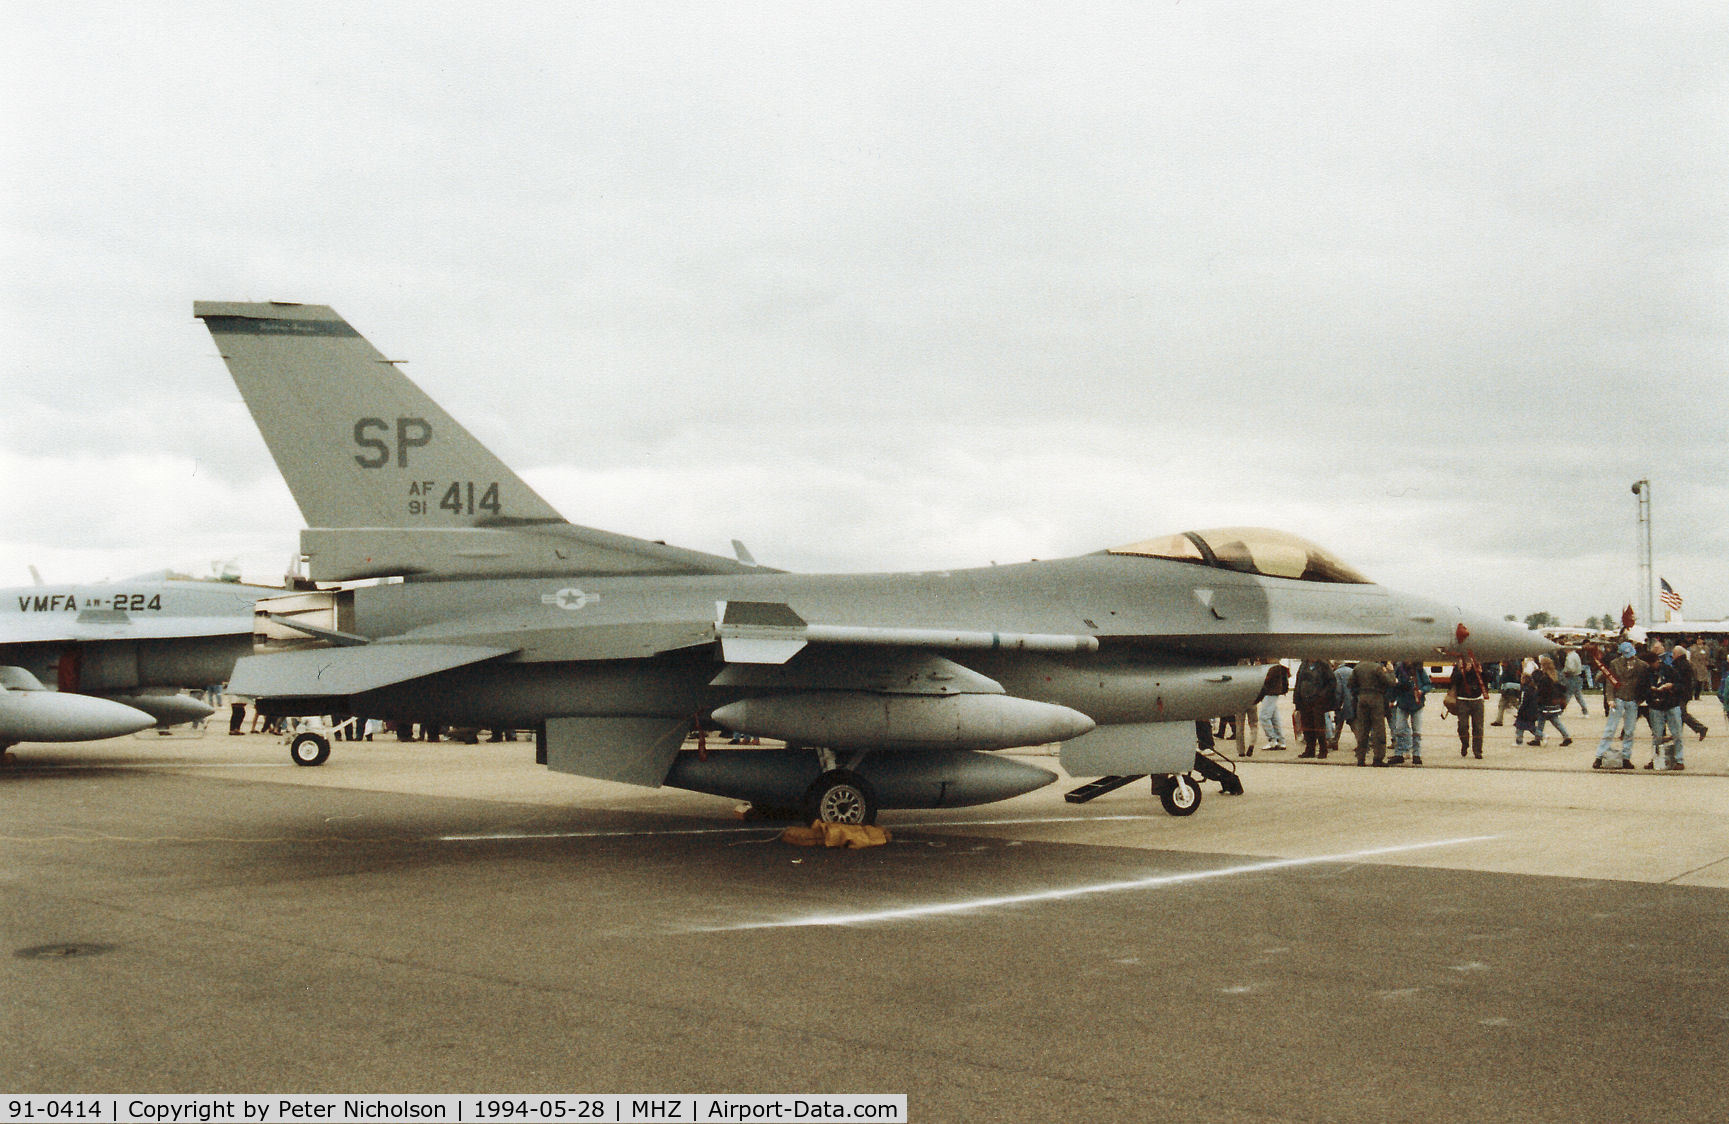 91-0414, 1991 General Dynamics F-16C Fighting Falcon C/N CC-112, F-16C Falcon of 23rd Fighter Squadron/52nd Fighter Wing based at Spangdahlem on display at the 1994 RAF Mildenhall Air Fete.